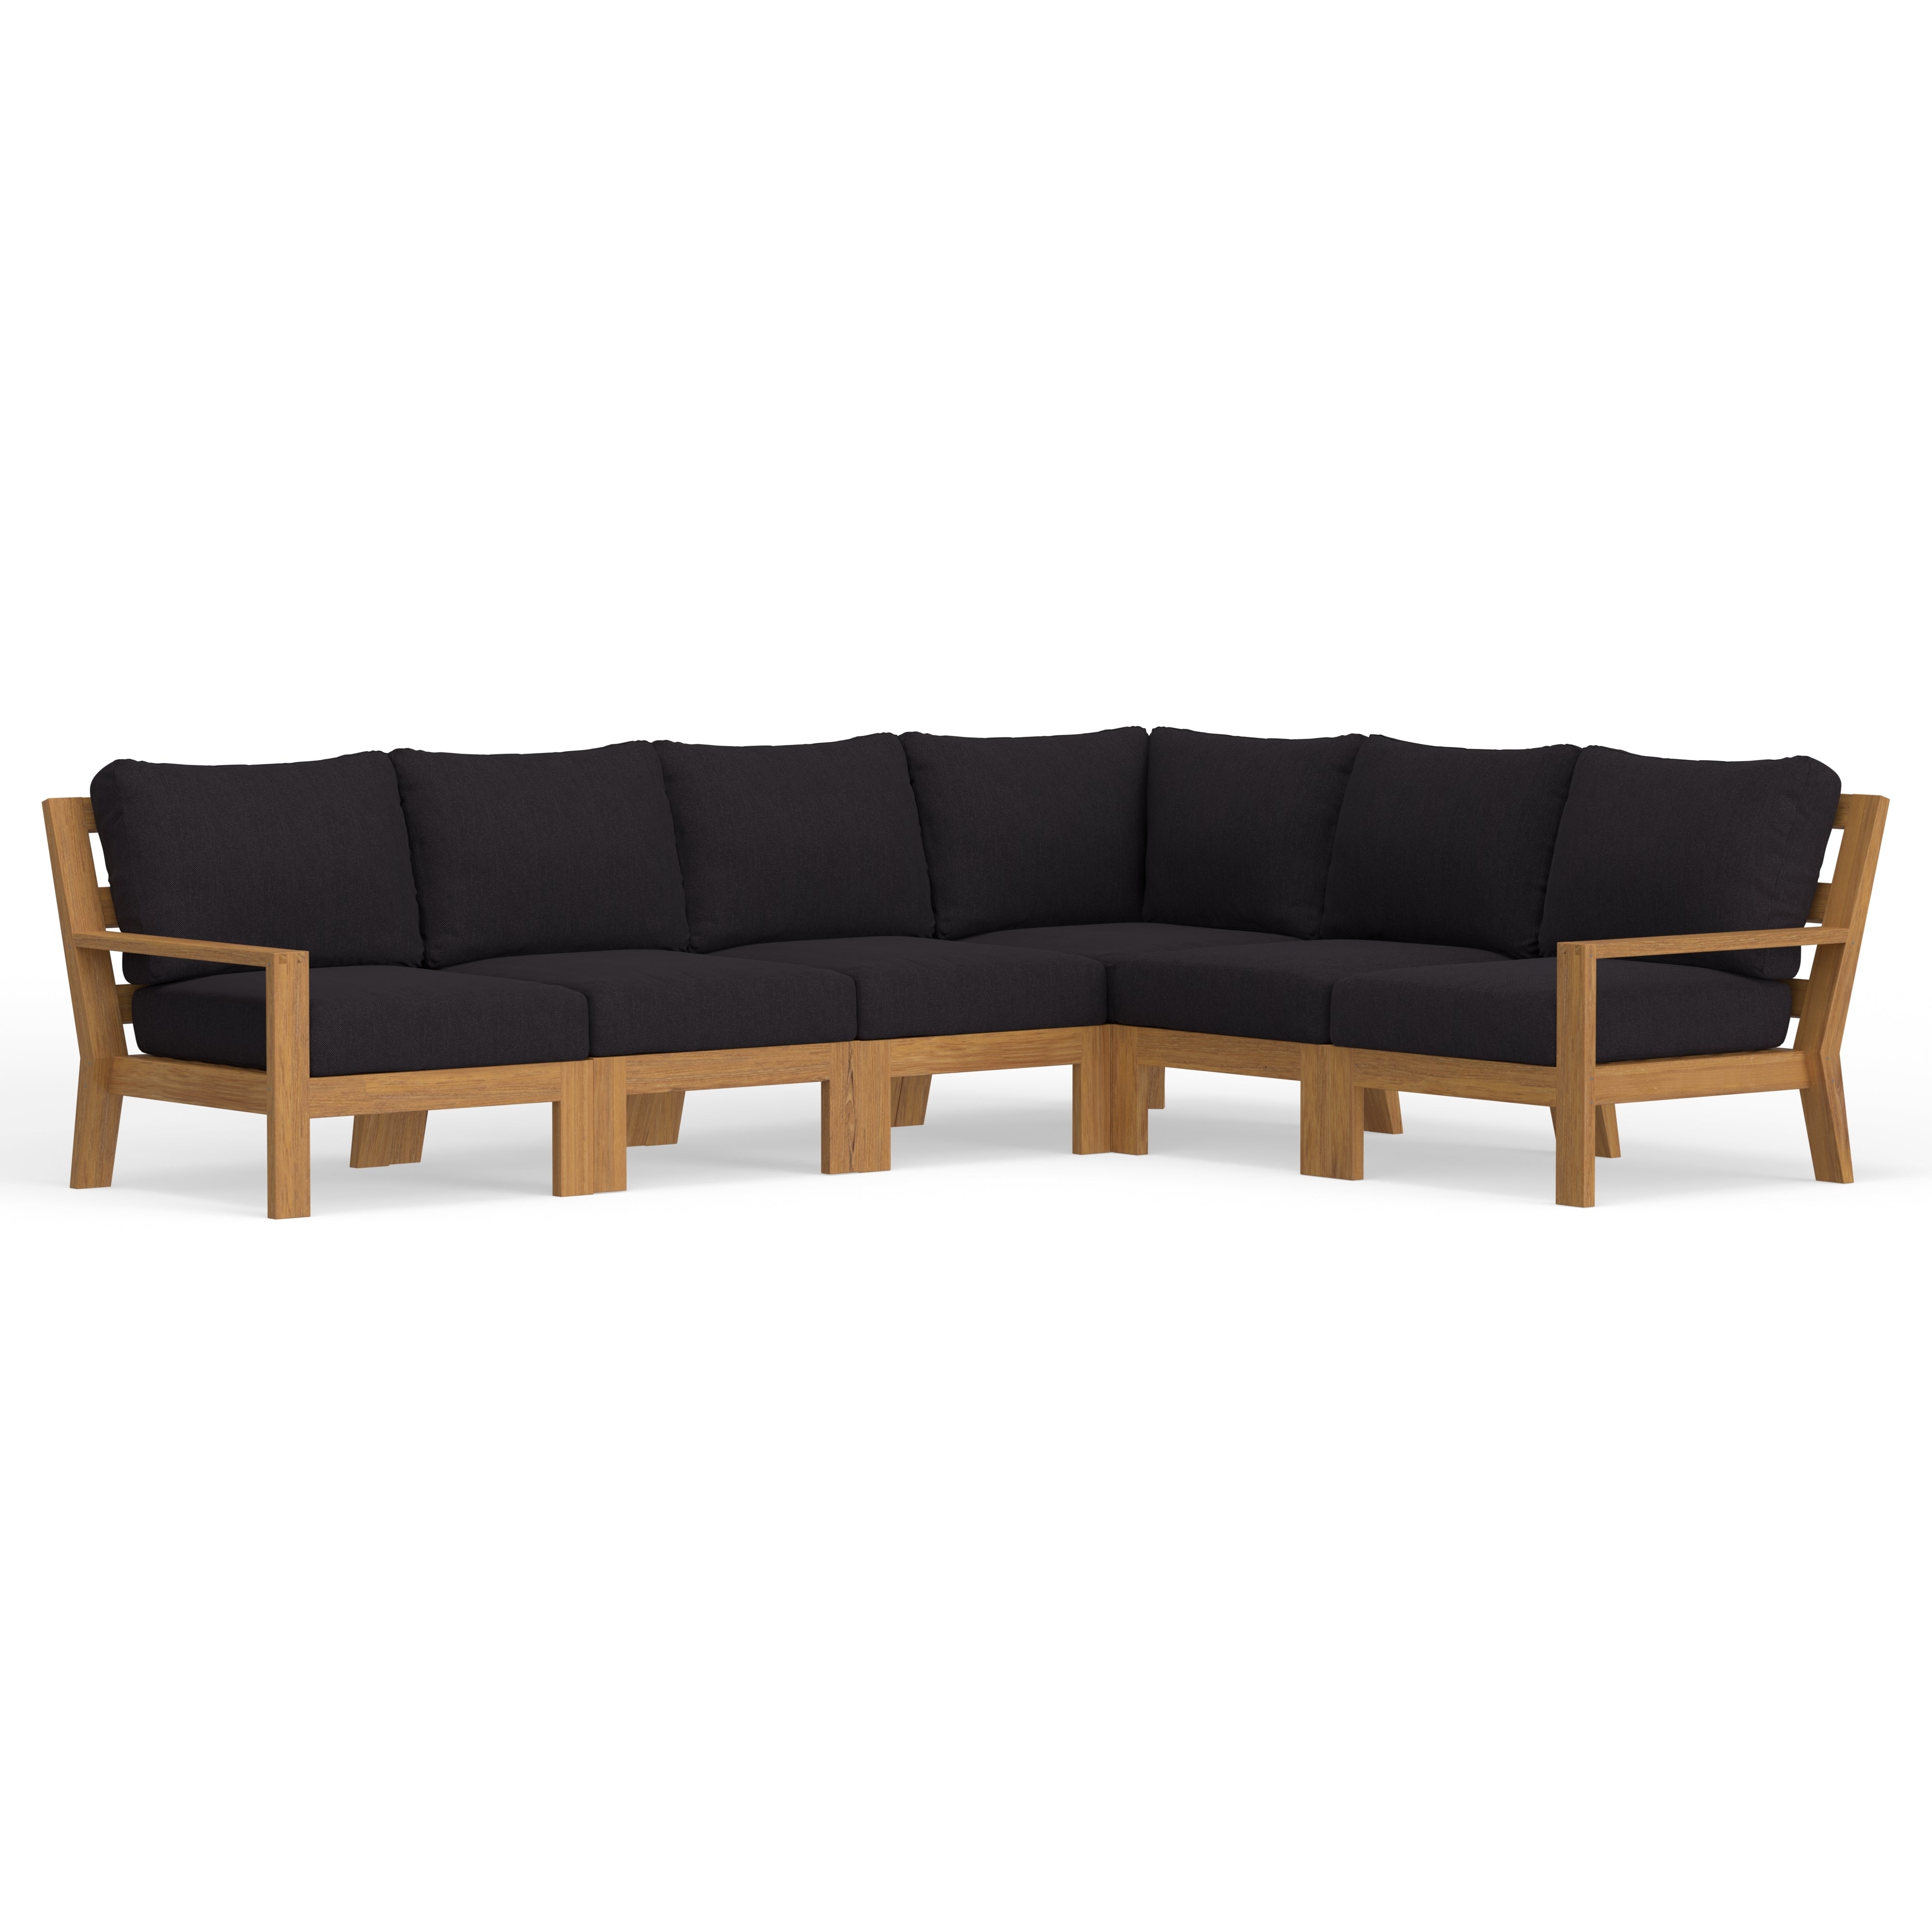 Luxurious Outdoor Sectional Sofa